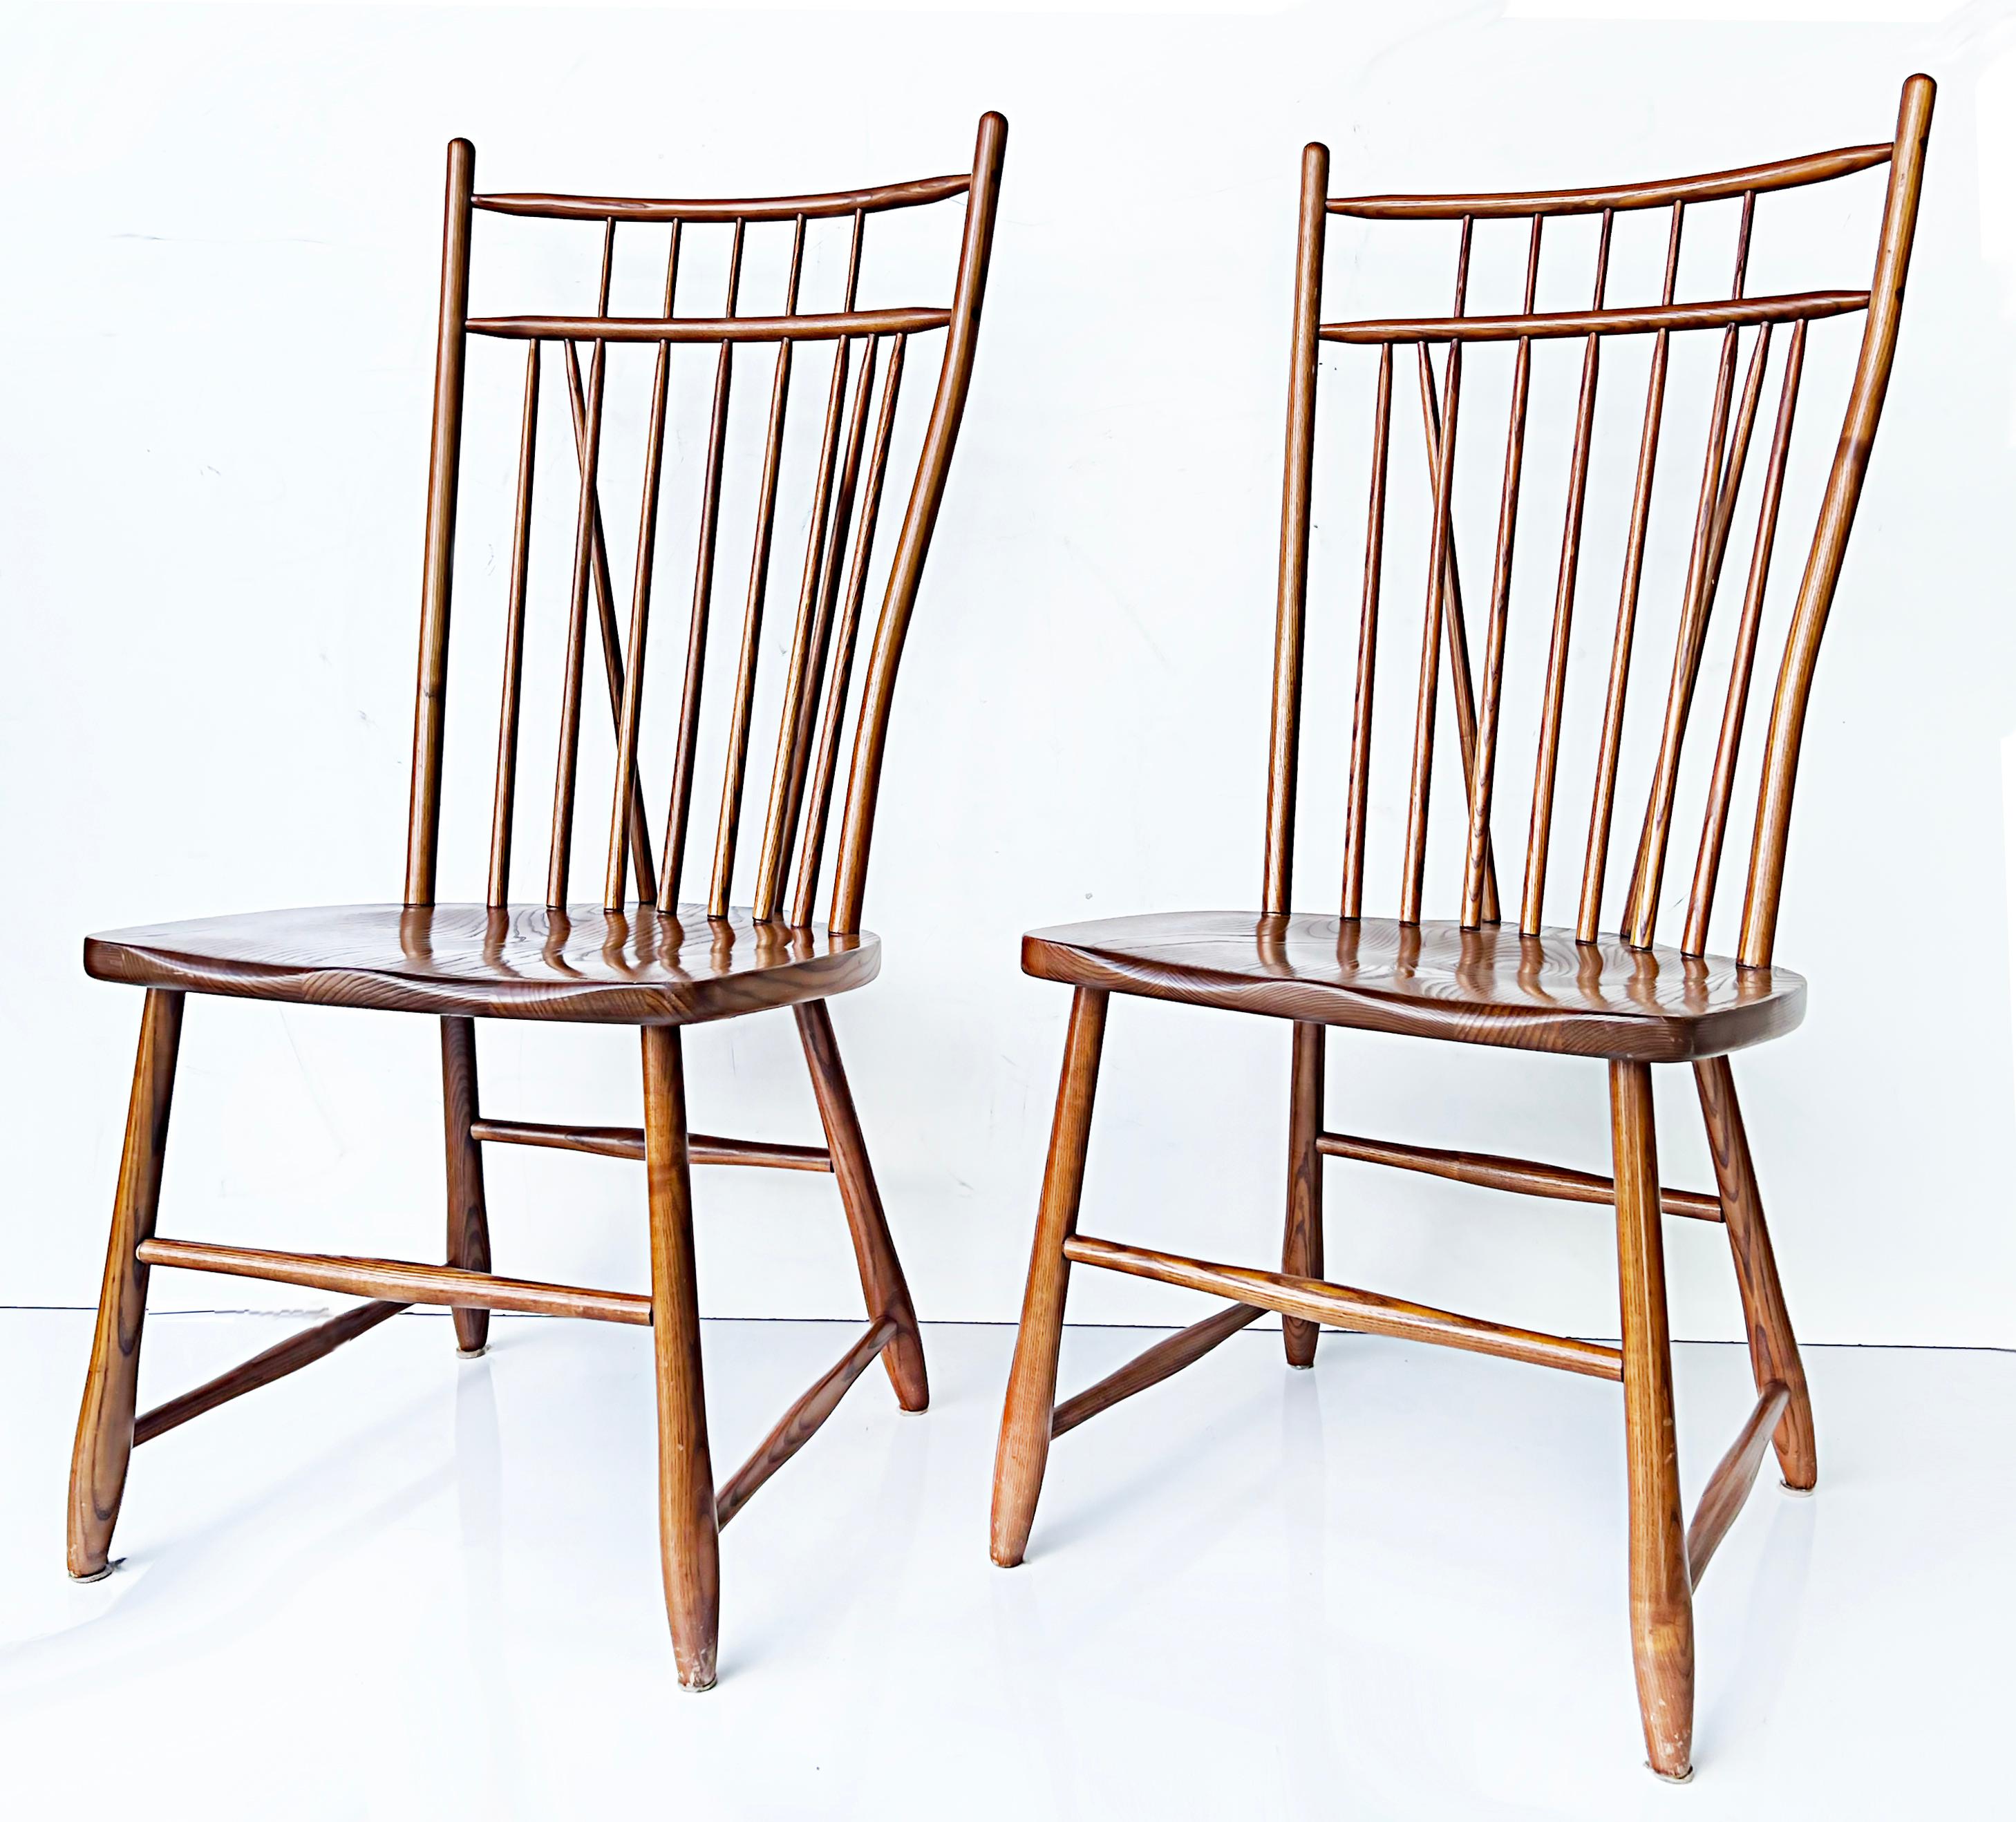 Mid-20th Century S Bent Bros. Vintage Modern Windsor Chairs, Set of 6, 1960s